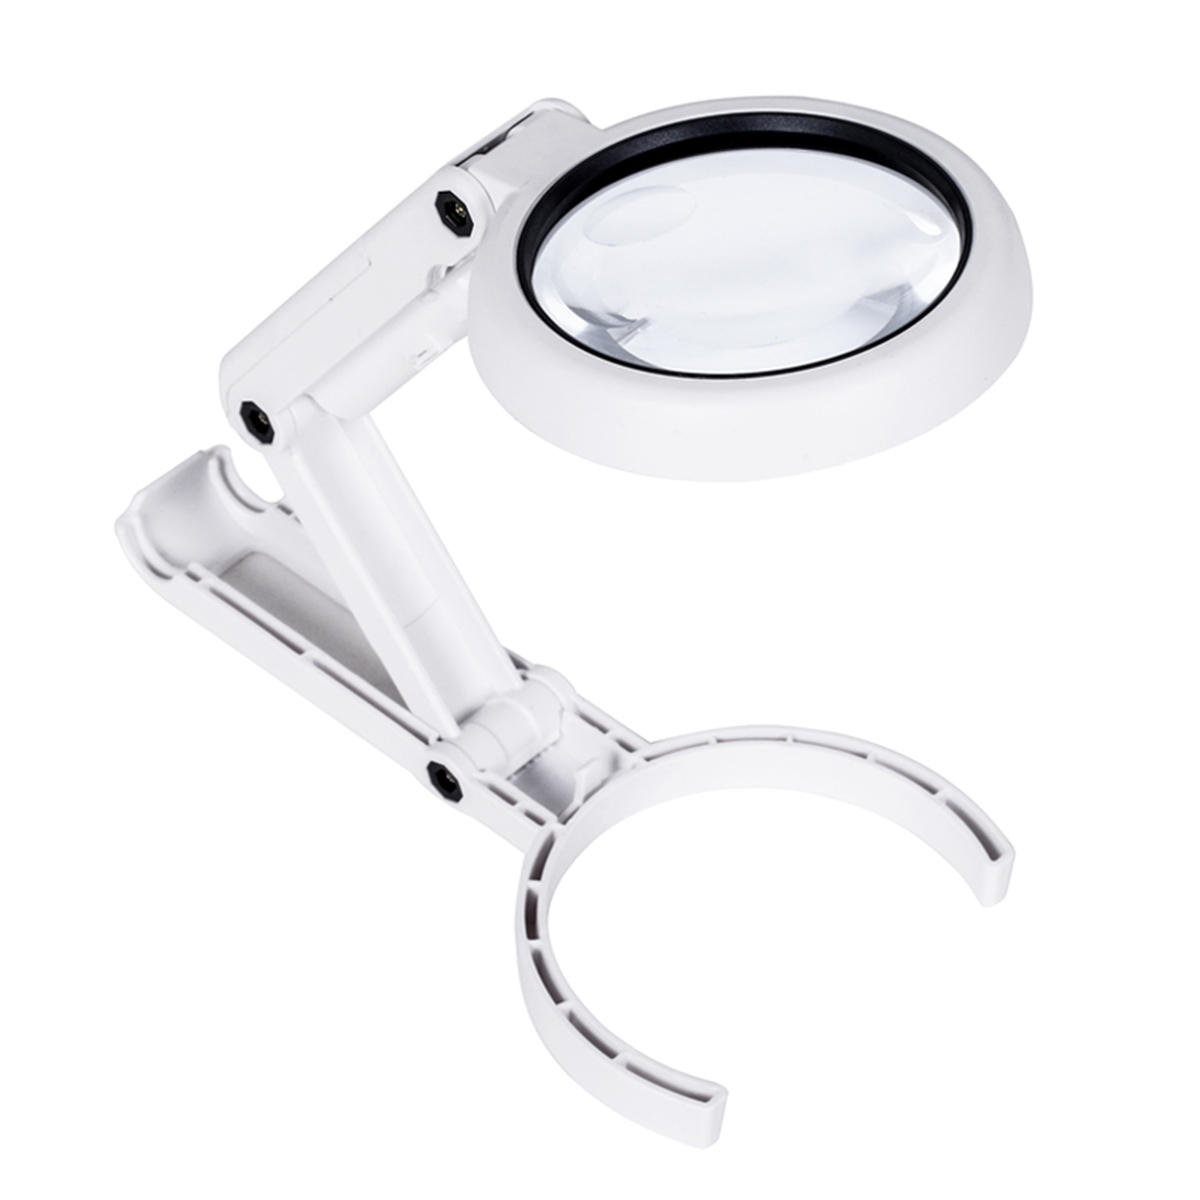 Handheld Portable Foldable Lamp Illuminated Magnifier 5X 11X Magnifying Table 8 LED Lights Loupe Magnifier Screen for Newspaper COD